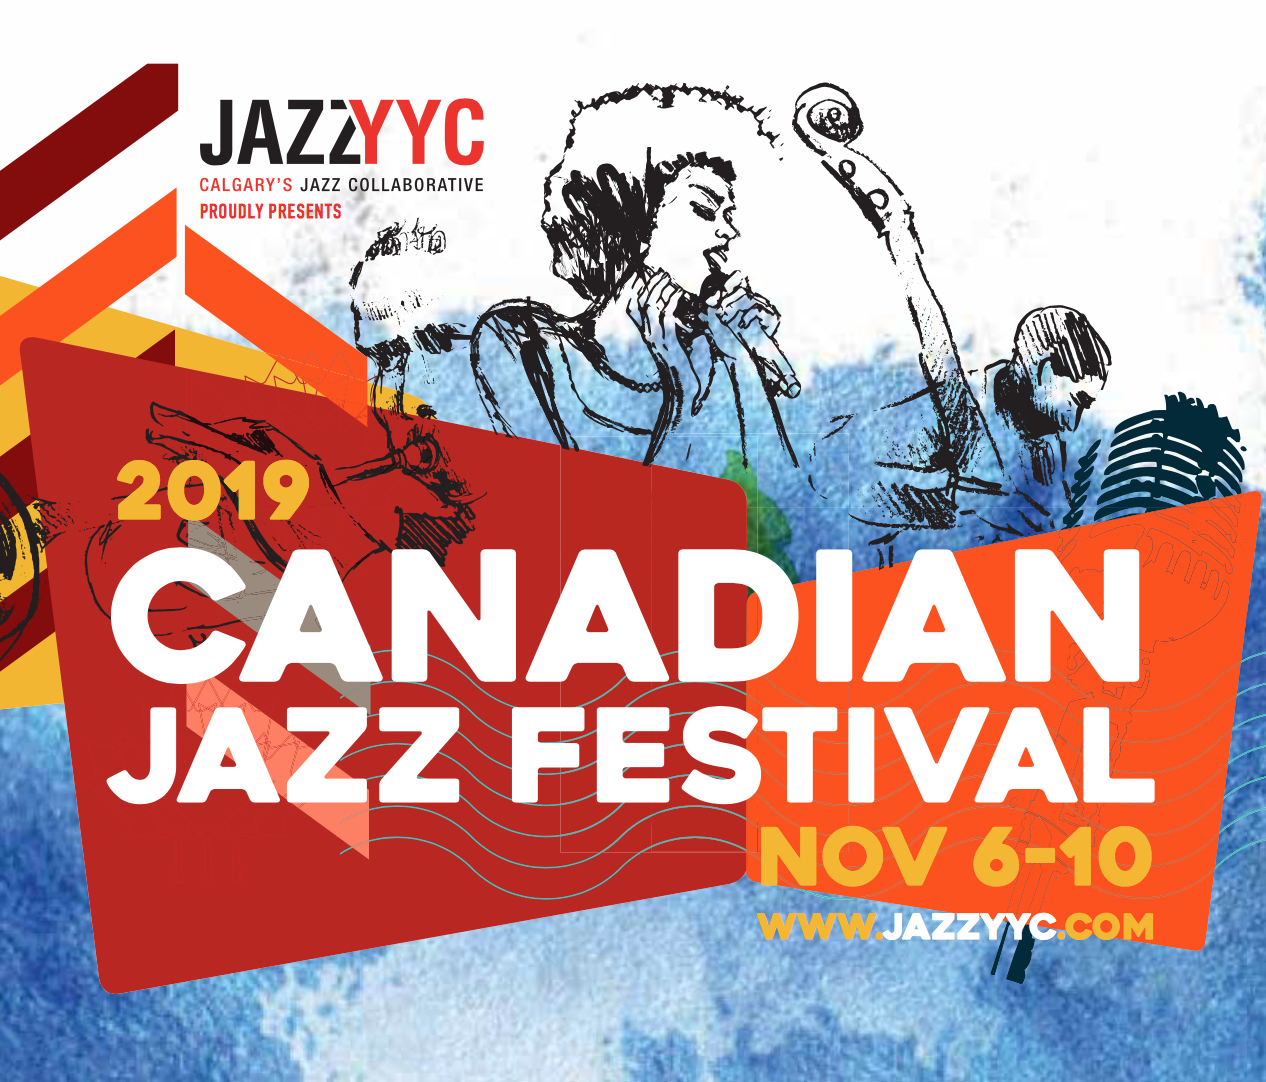 FOUR ON THE FLOOR: A Drummer's Guide to the 2019 JazzYYC Canadian Jazz ...